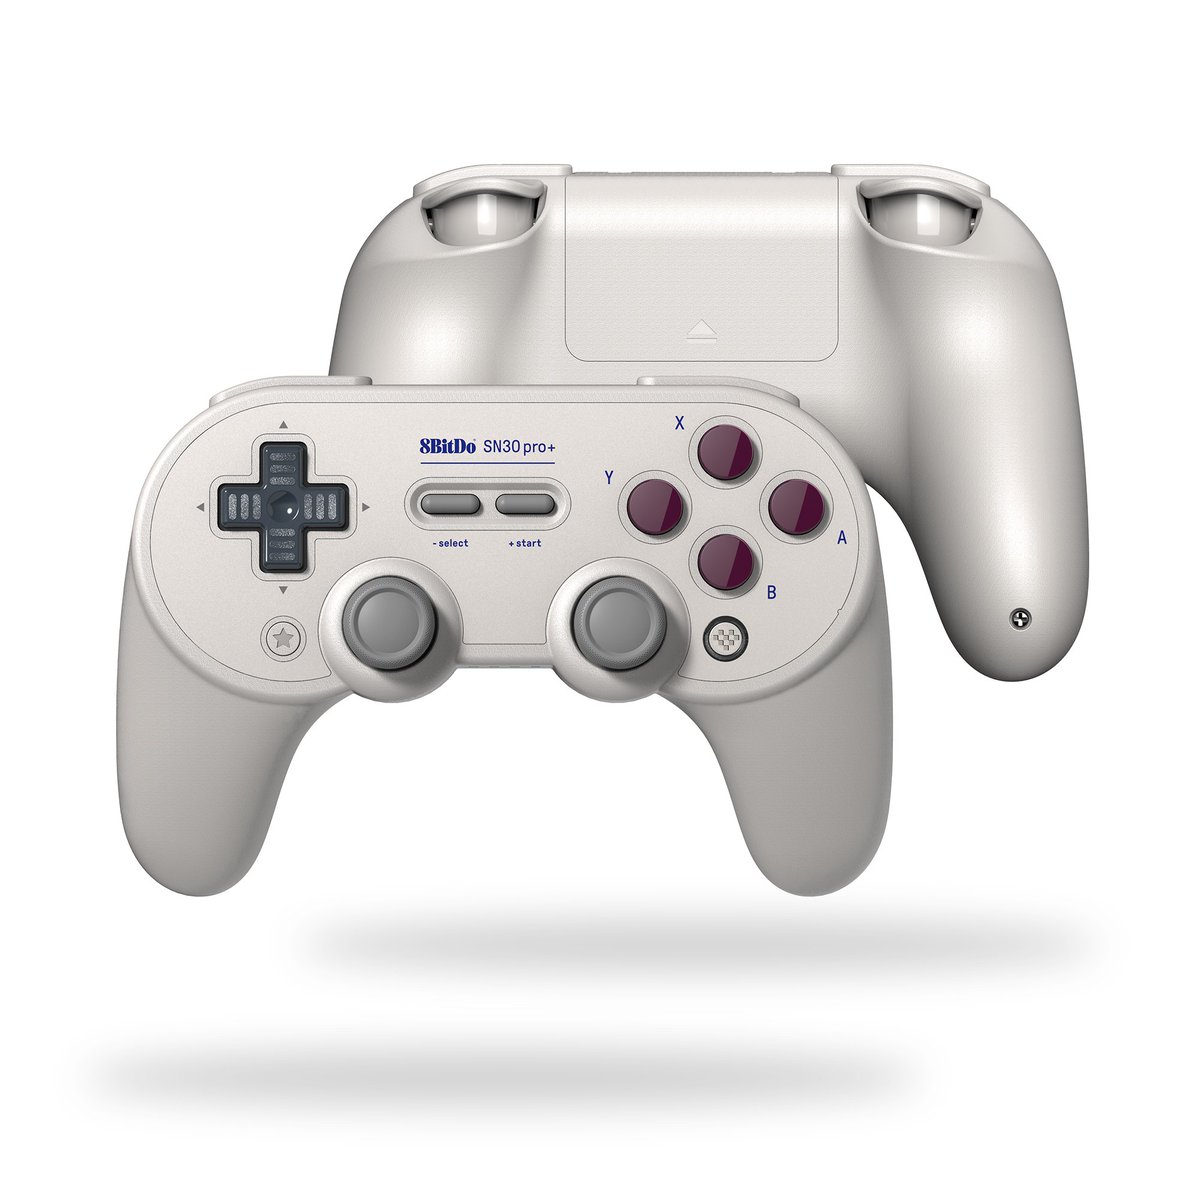 8bitdo Sn30 Pro Comes In Three Different Variants Black Edition Game Boy Edition And Super Nintendo Edition Pre Order Yours Now T Co Nci76hekxs T Co Oevaulxk0a